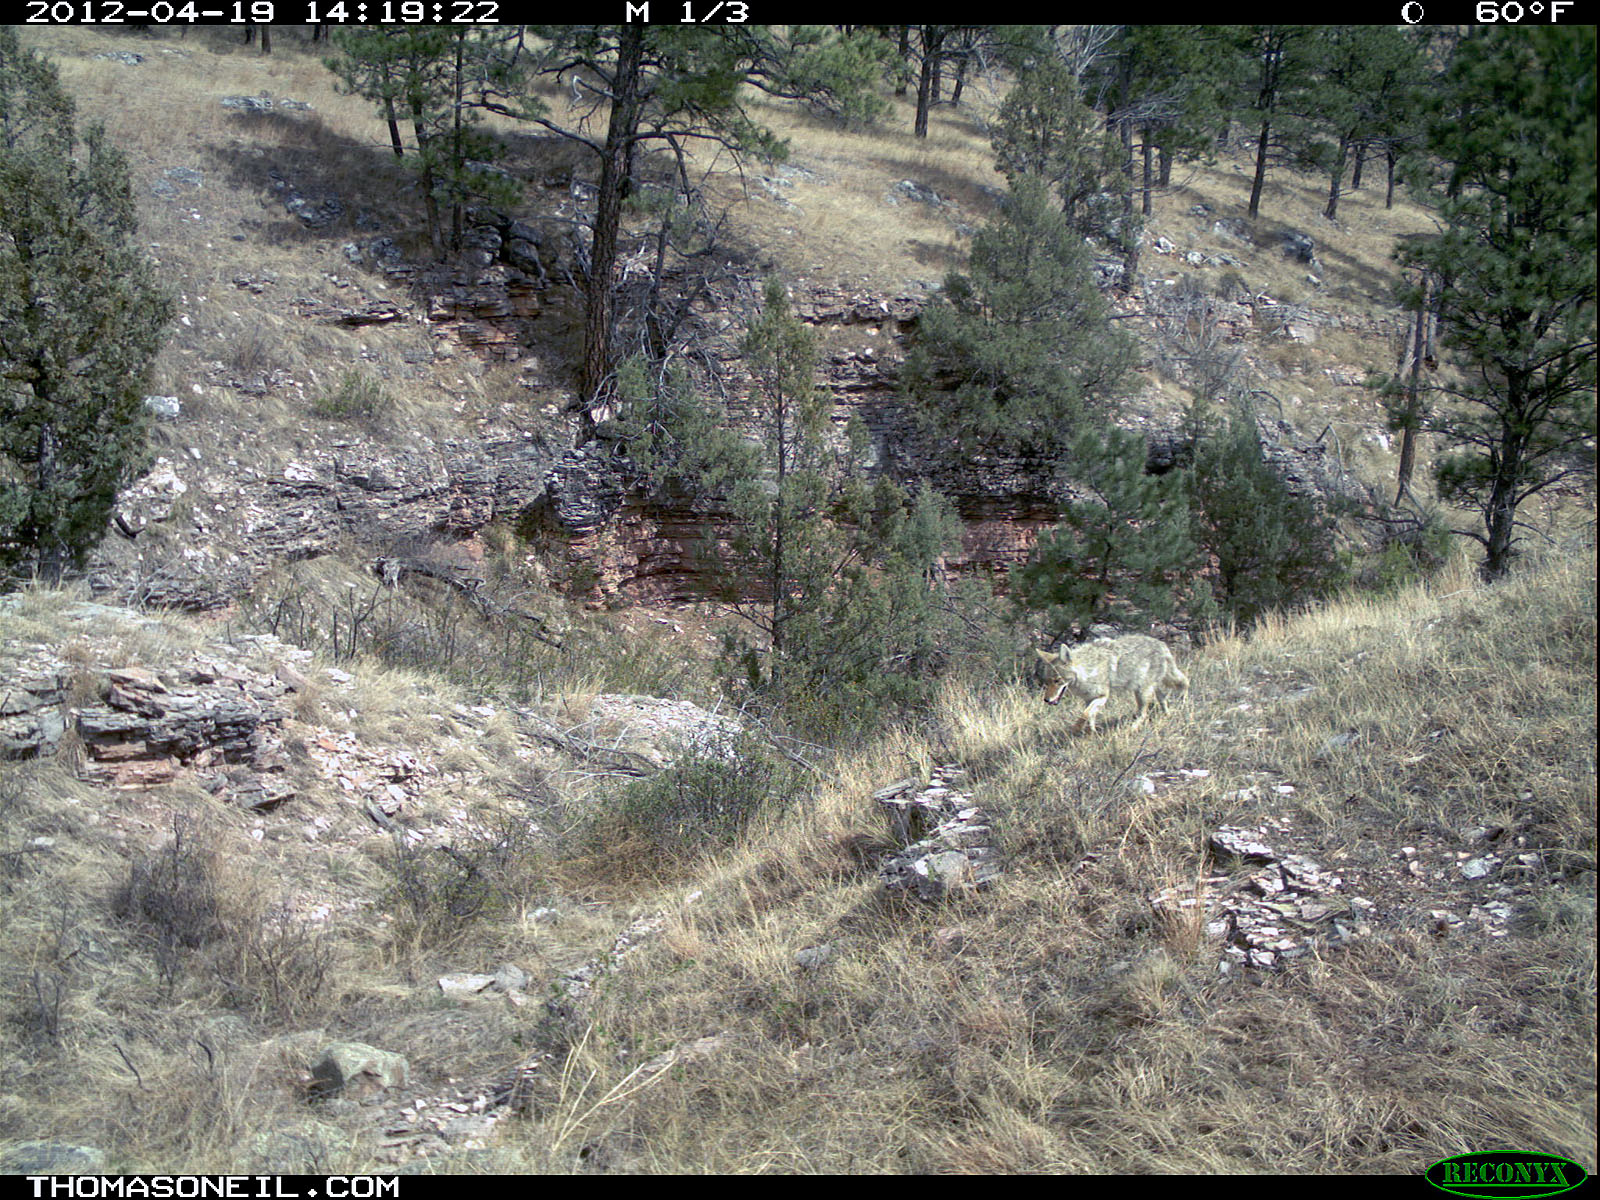 Trailcam picture of coyote, Wind Cave National Park, April 19.